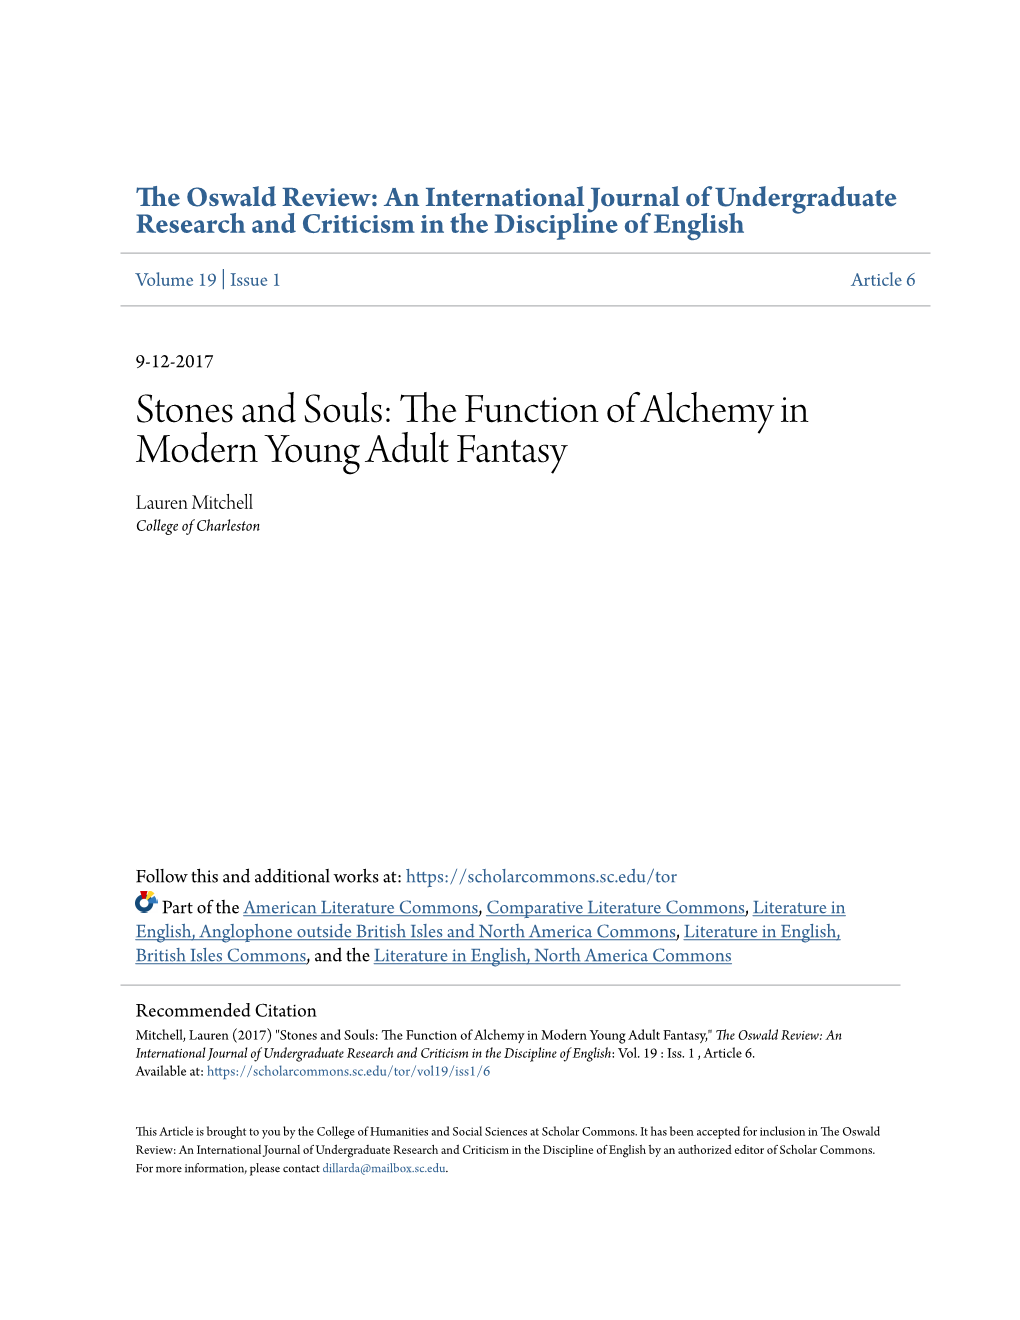 The Function of Alchemy in Modern Young Adult Fantasy